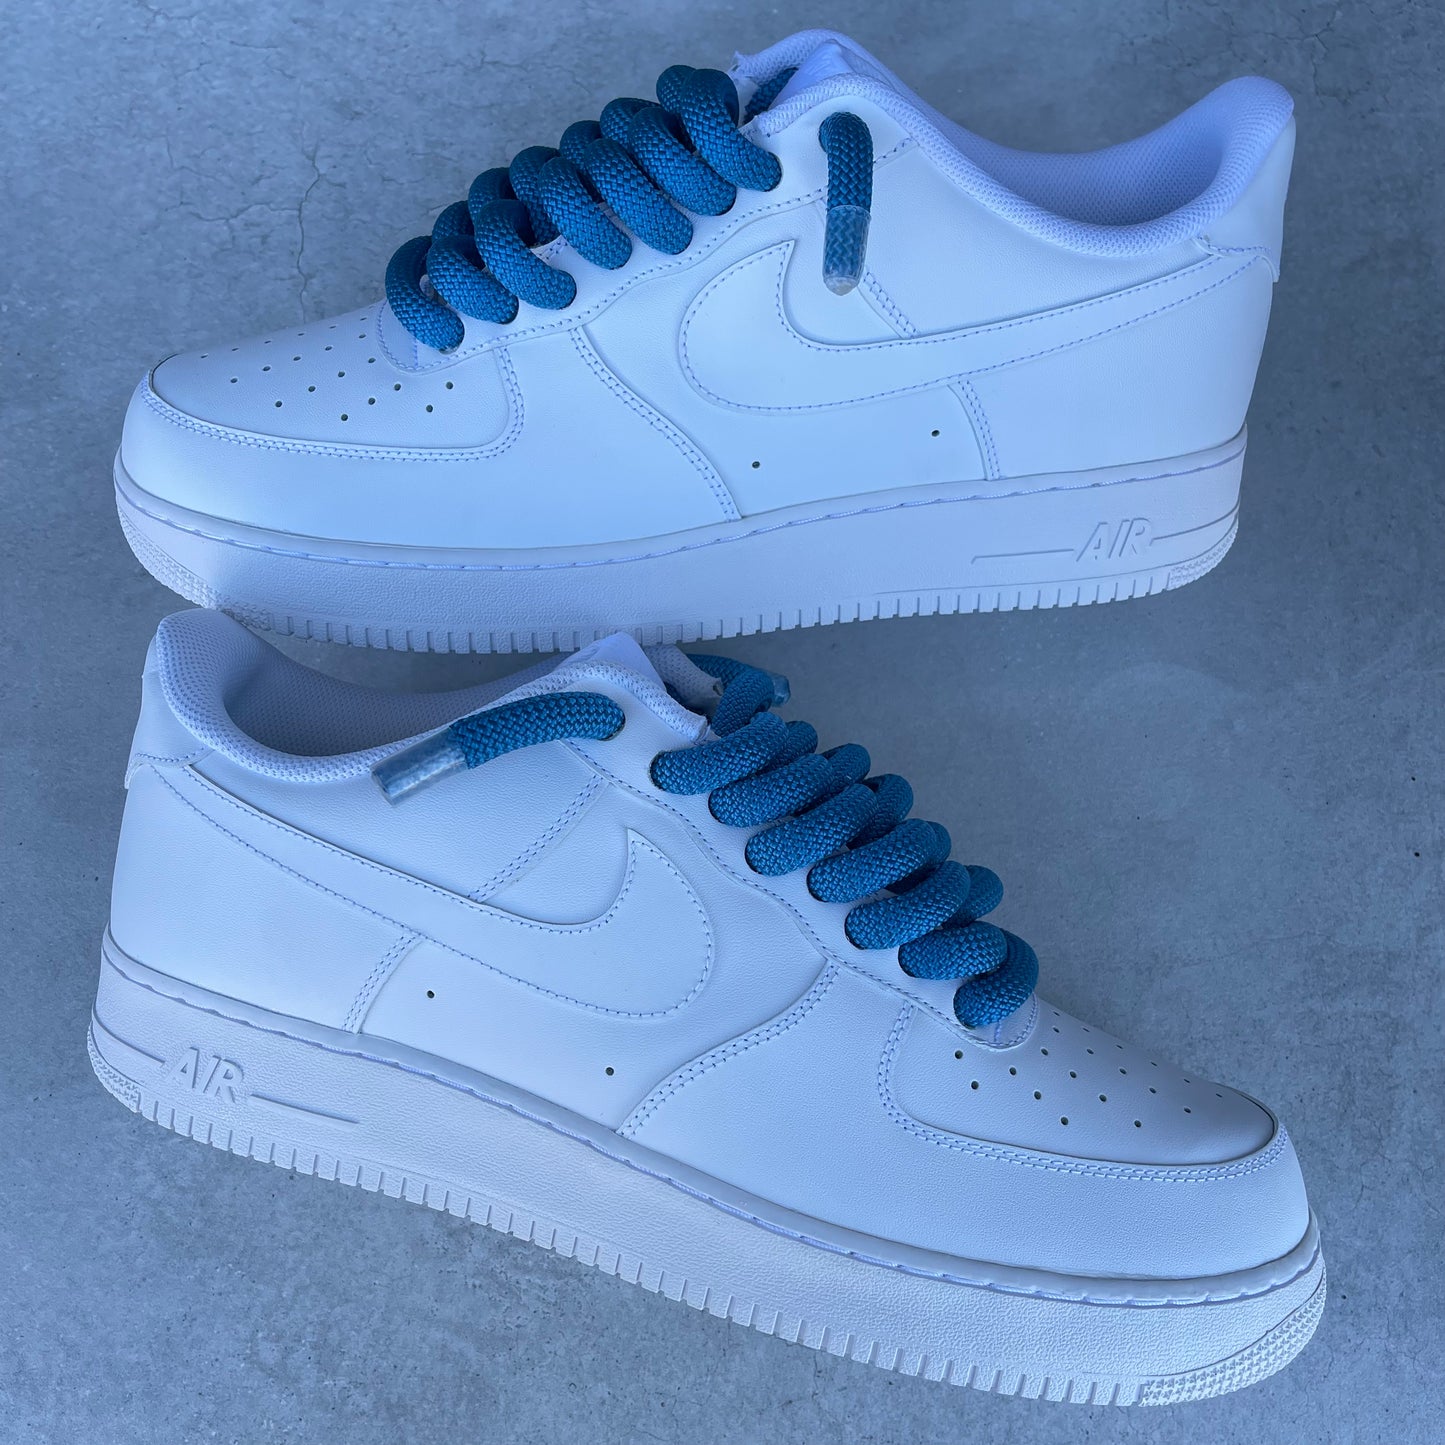 Custom AIR FORCE 1 - Rope laces 2.0 (blue)